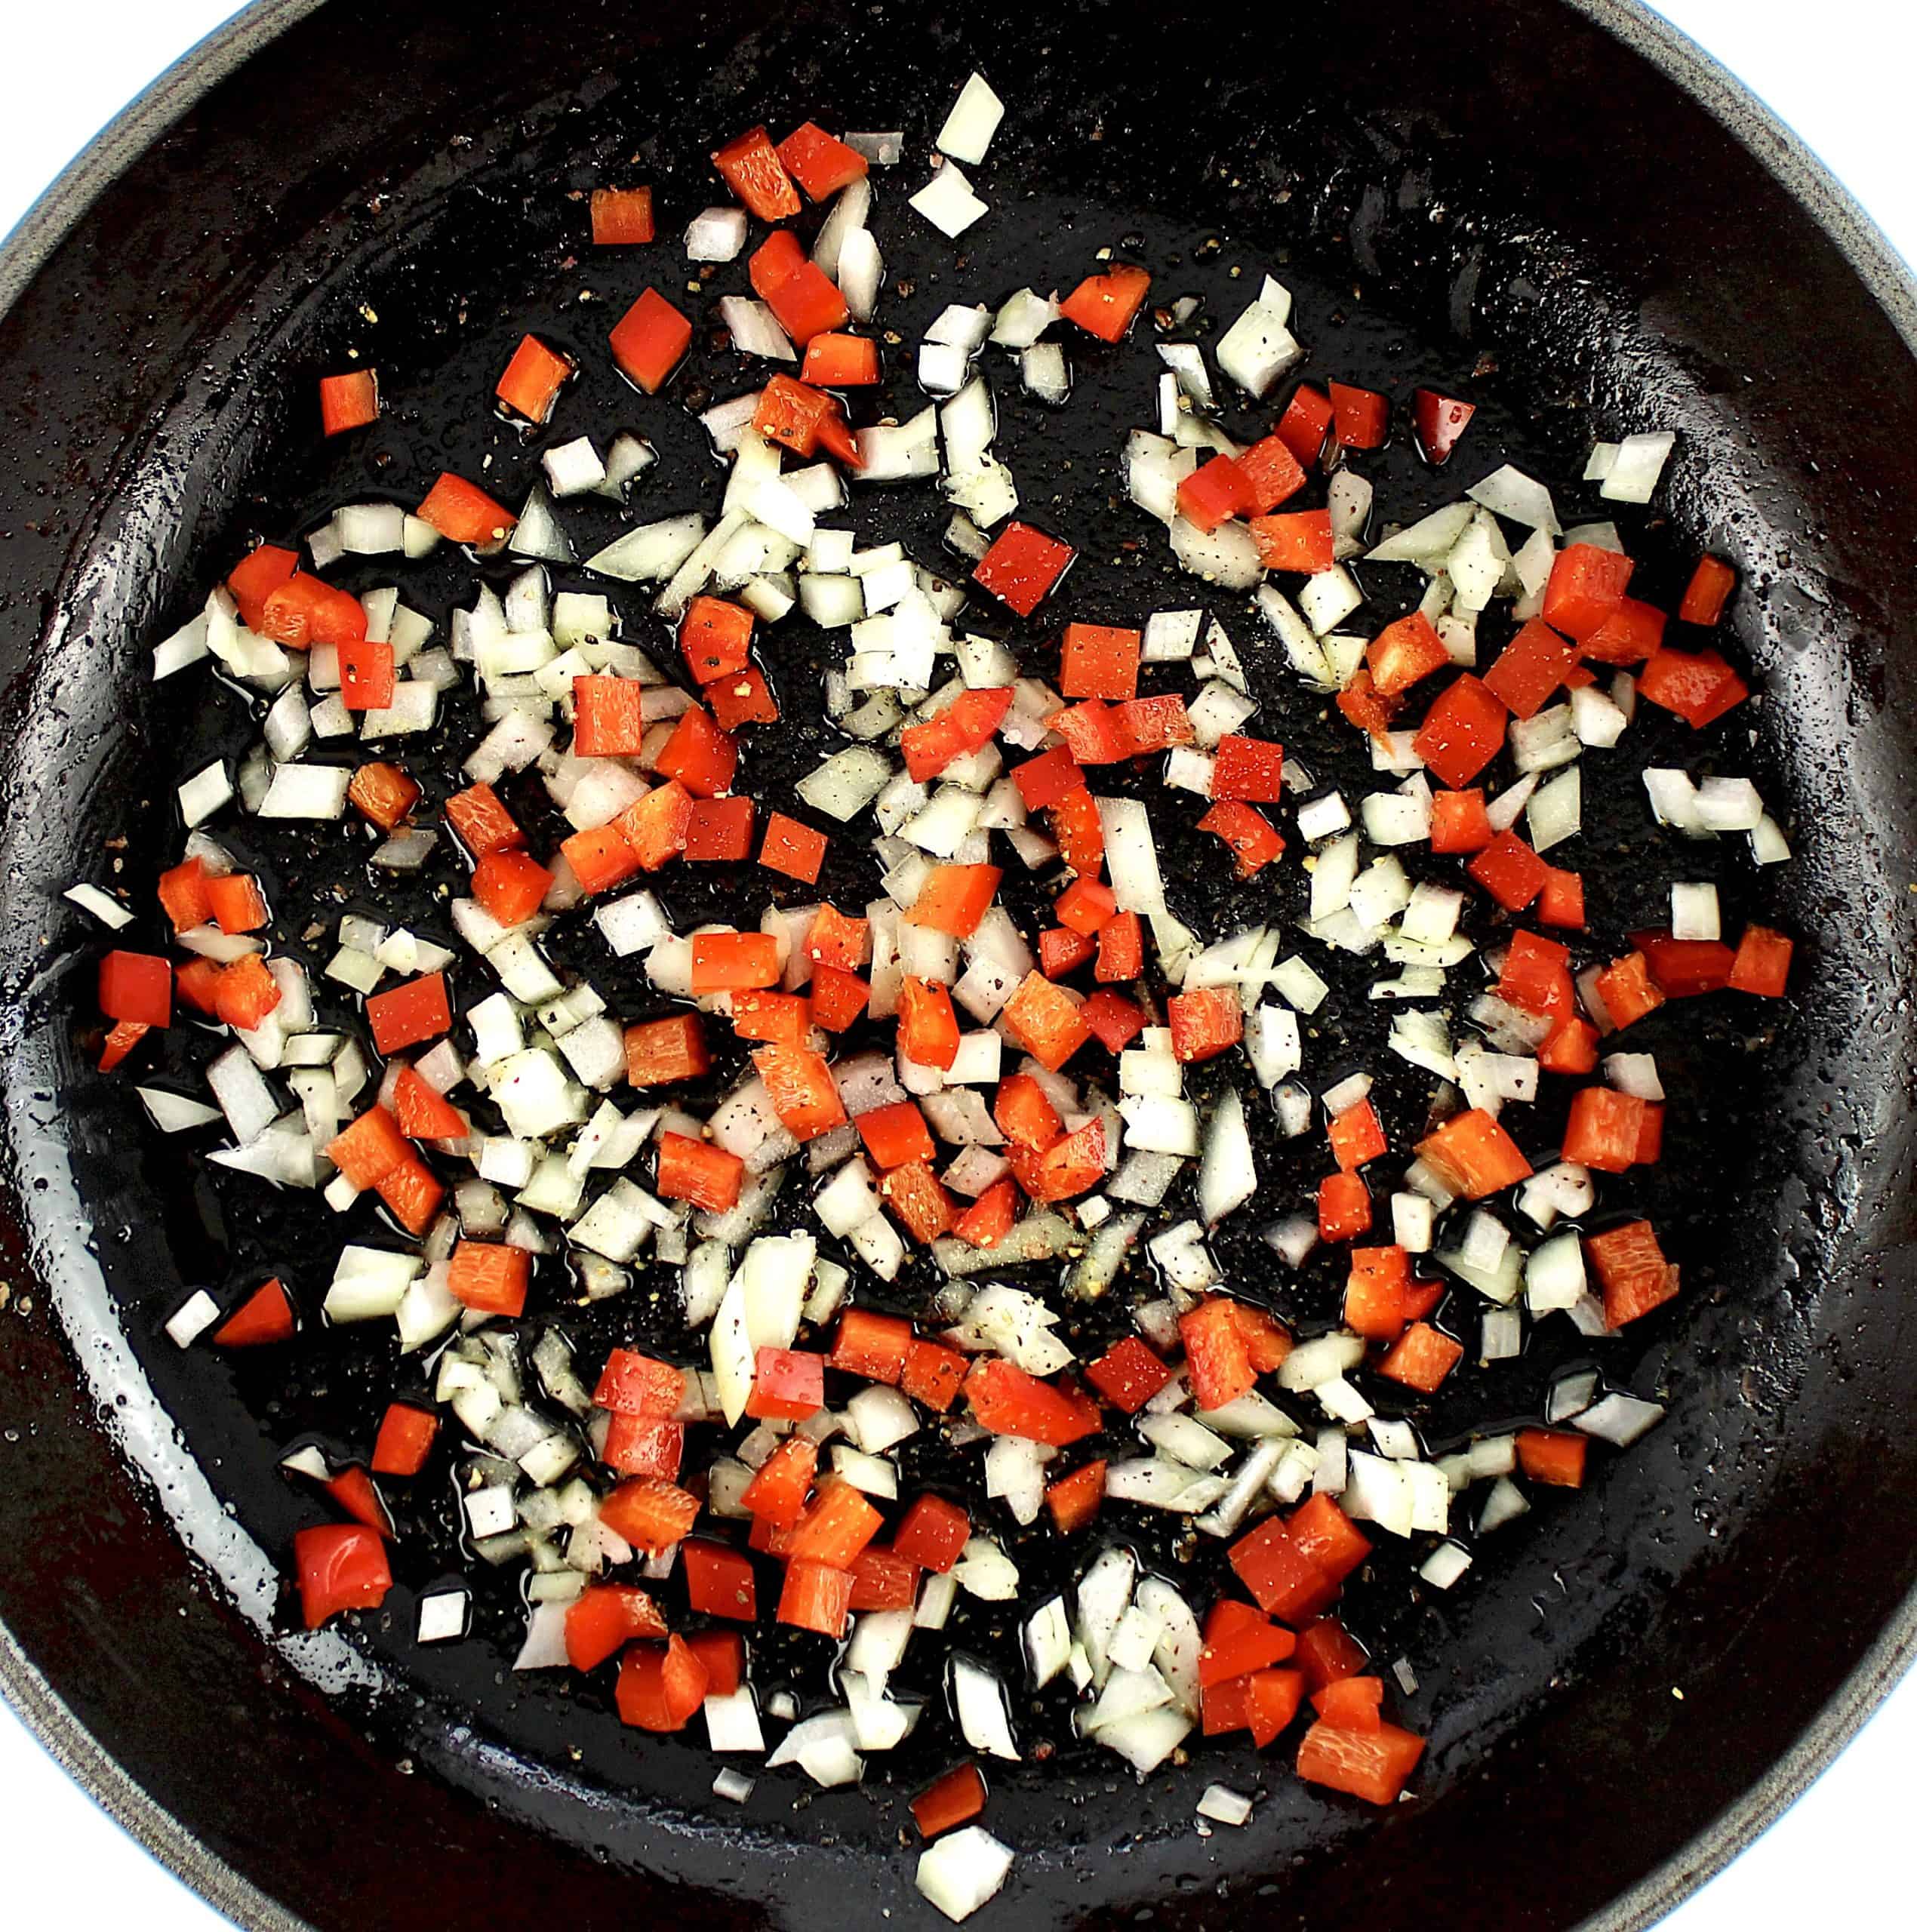 diced peppers and onions cooking in skillet